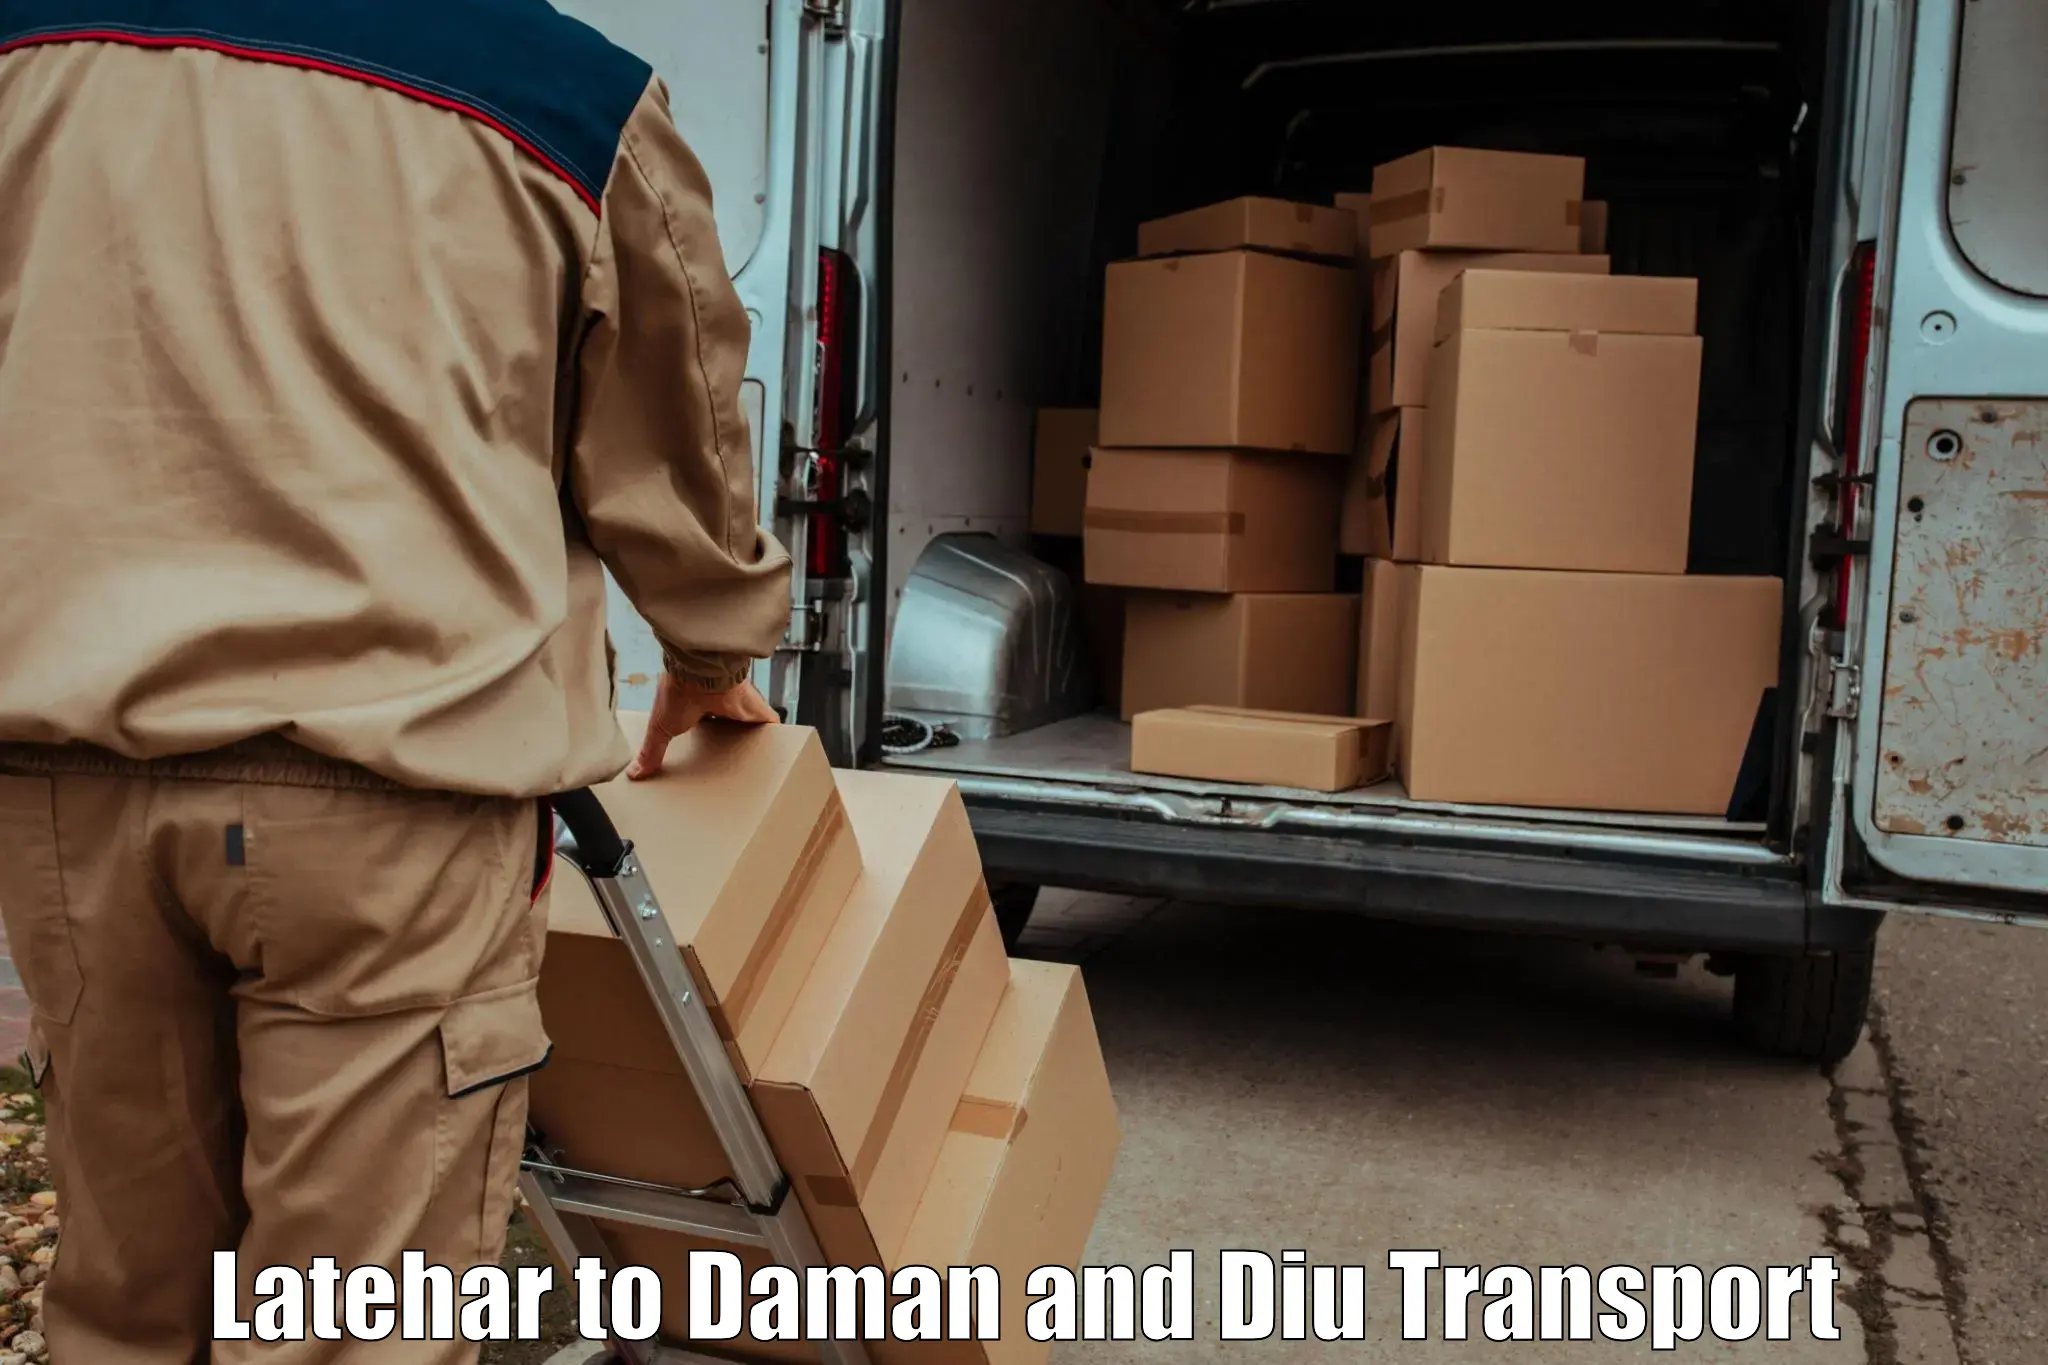 Commercial transport service Latehar to Daman and Diu